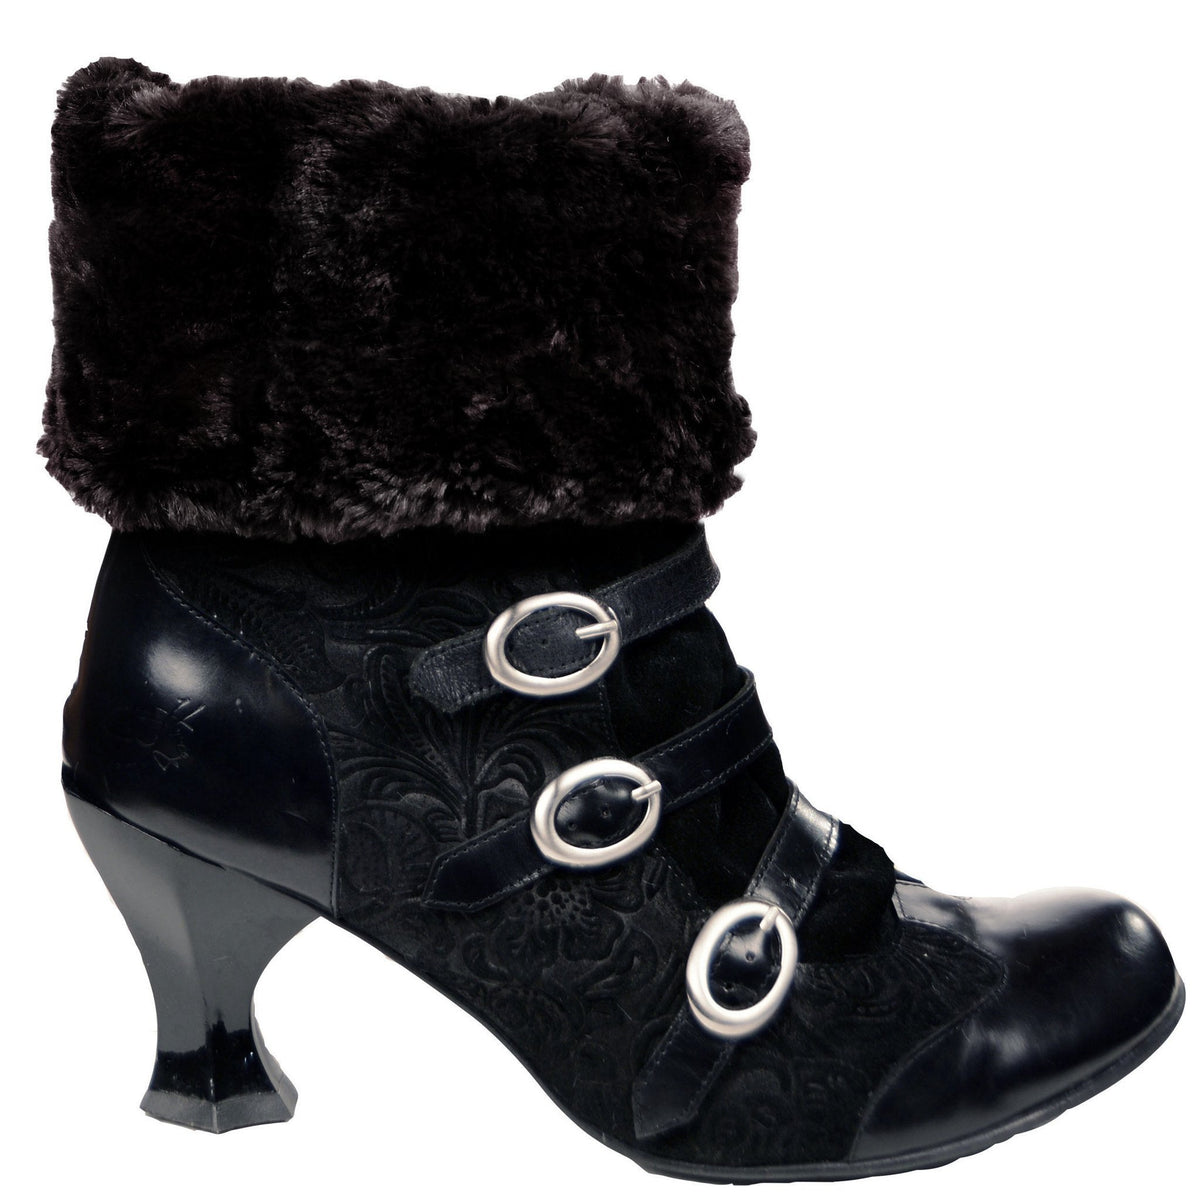 Boot Topper - Cuddly Faux Furs (Sold Out!)